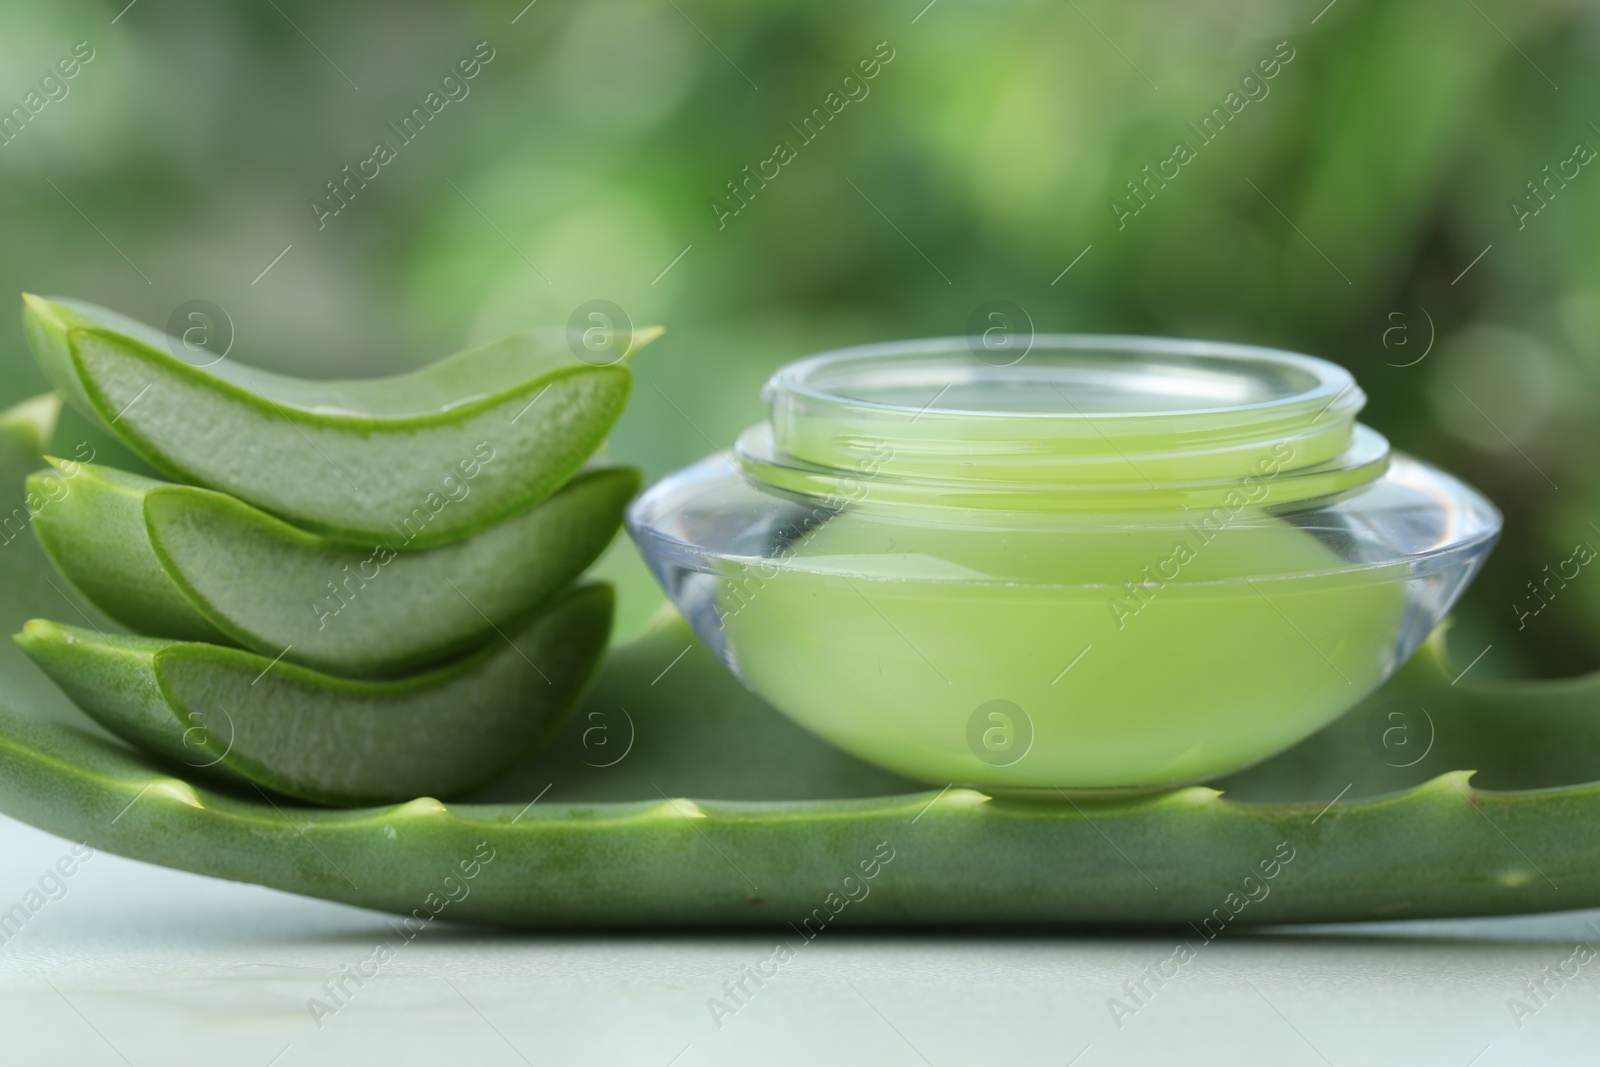 Photo of Jar with cream and cut aloe leaf on white table against blurred green background, closeup